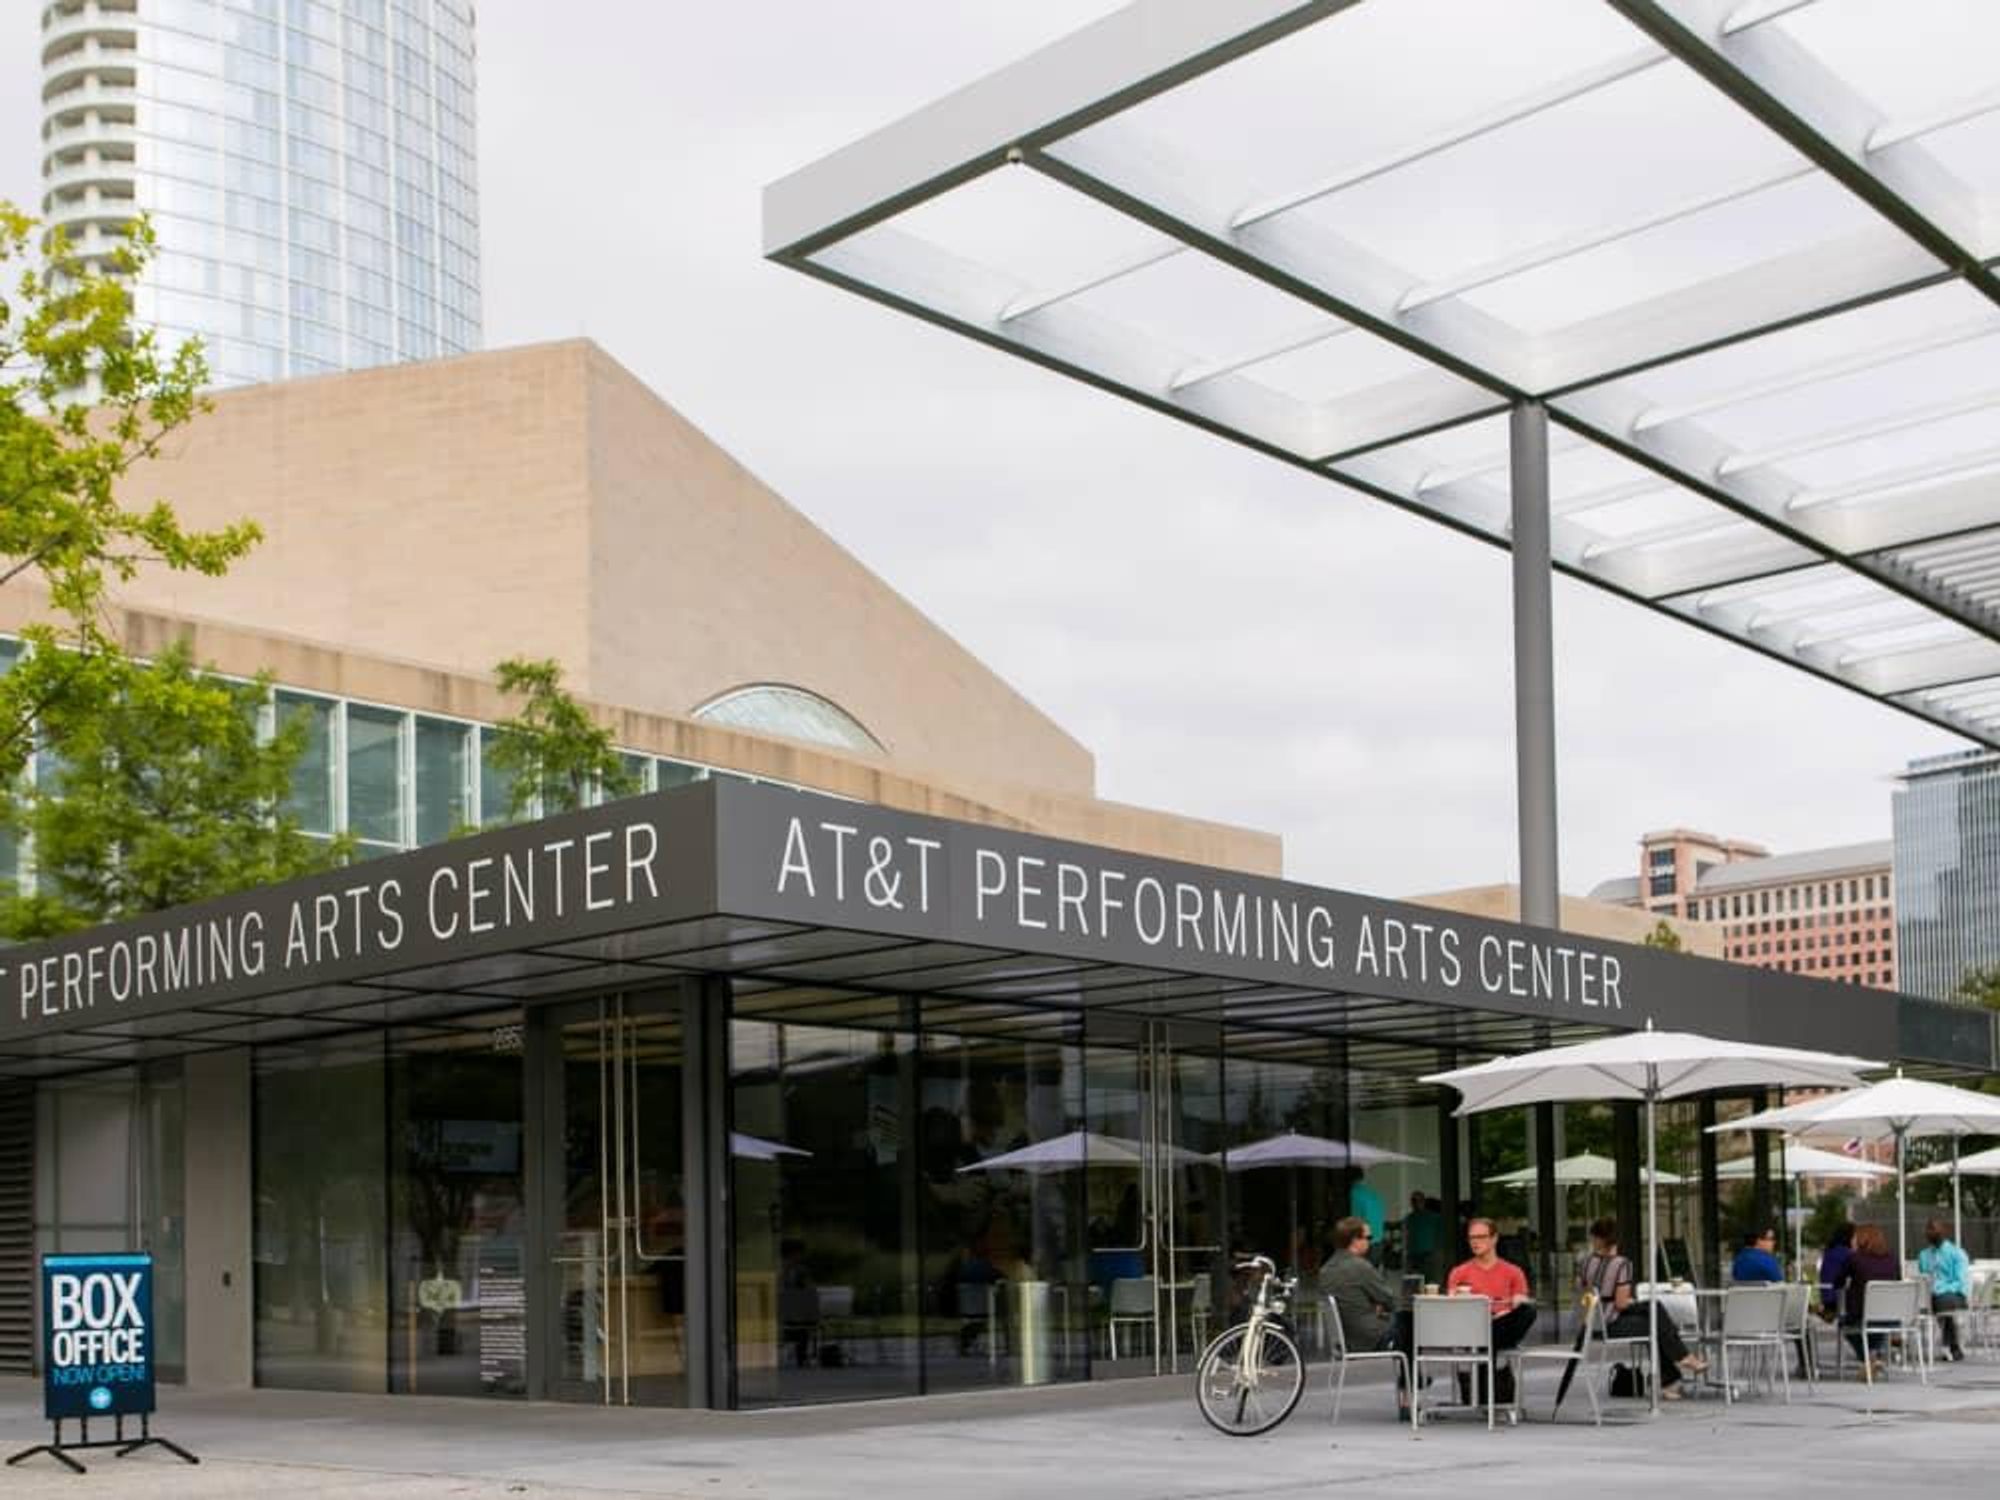 AT&T Performing Arts Center cafe and box office